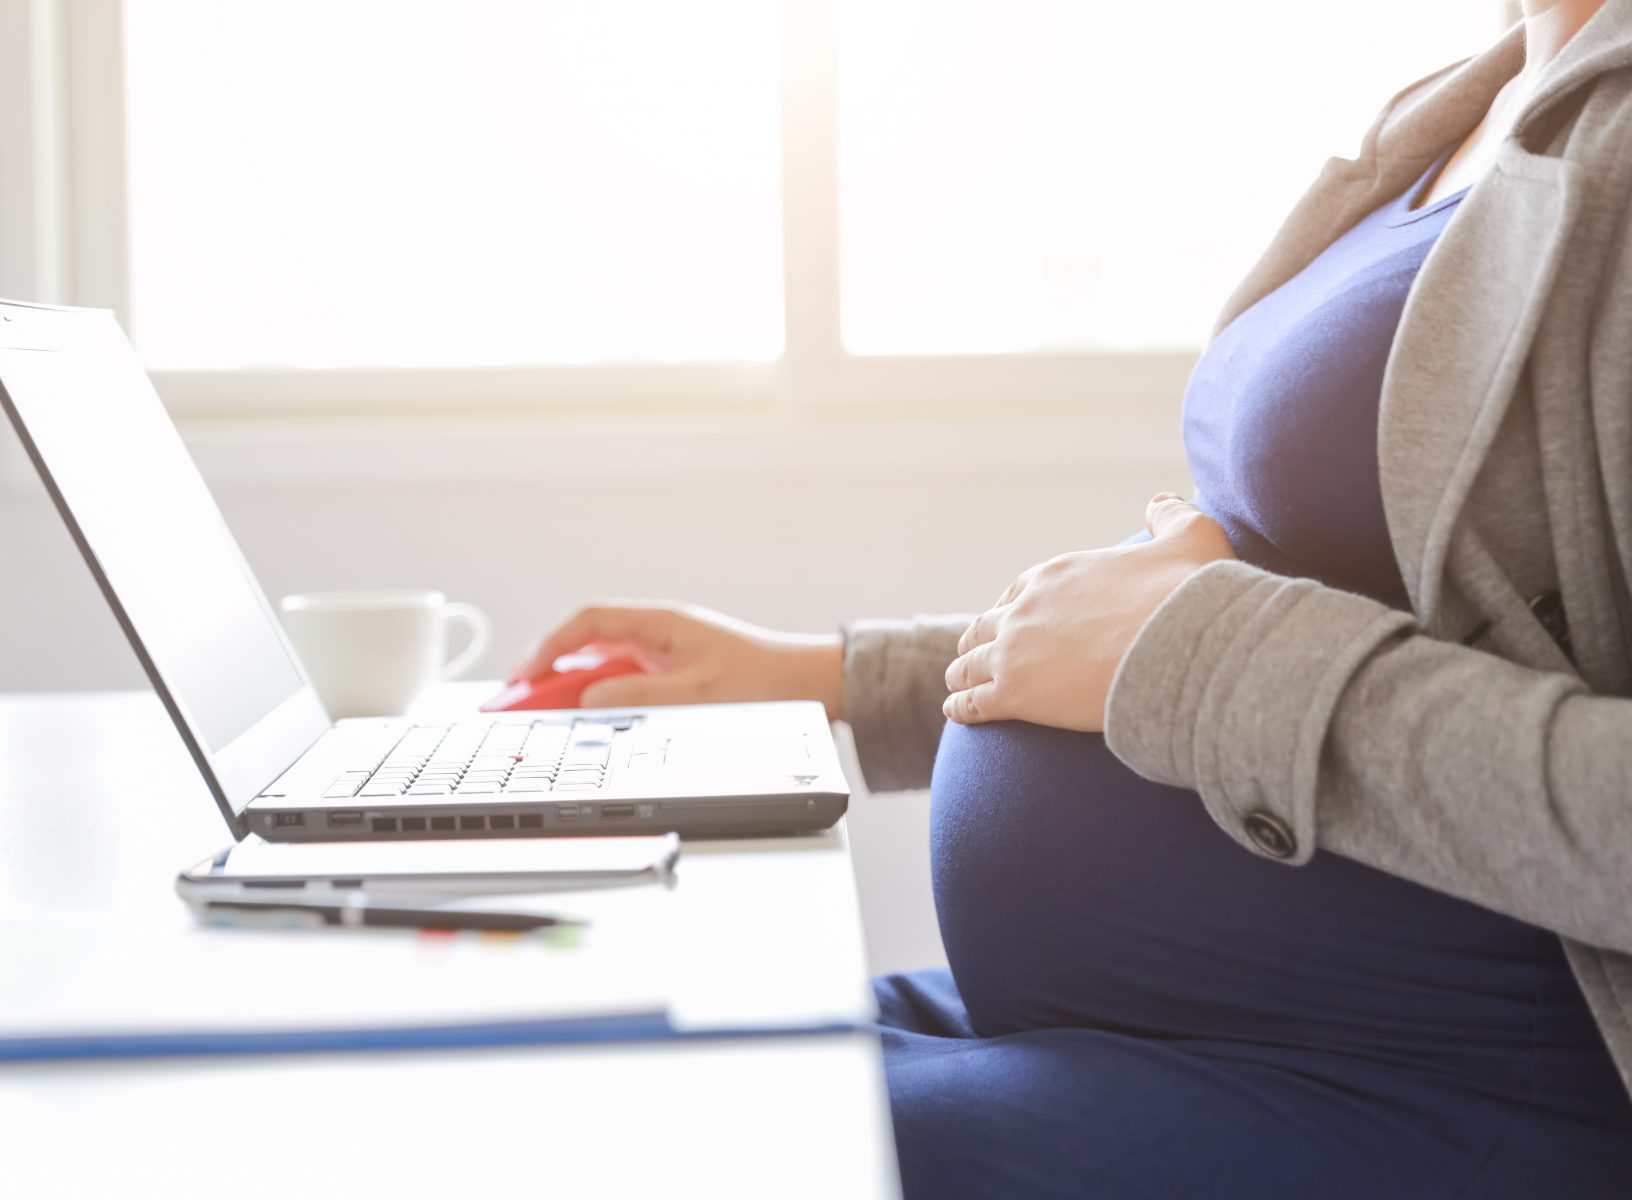 Maternity Leave During Covid-19